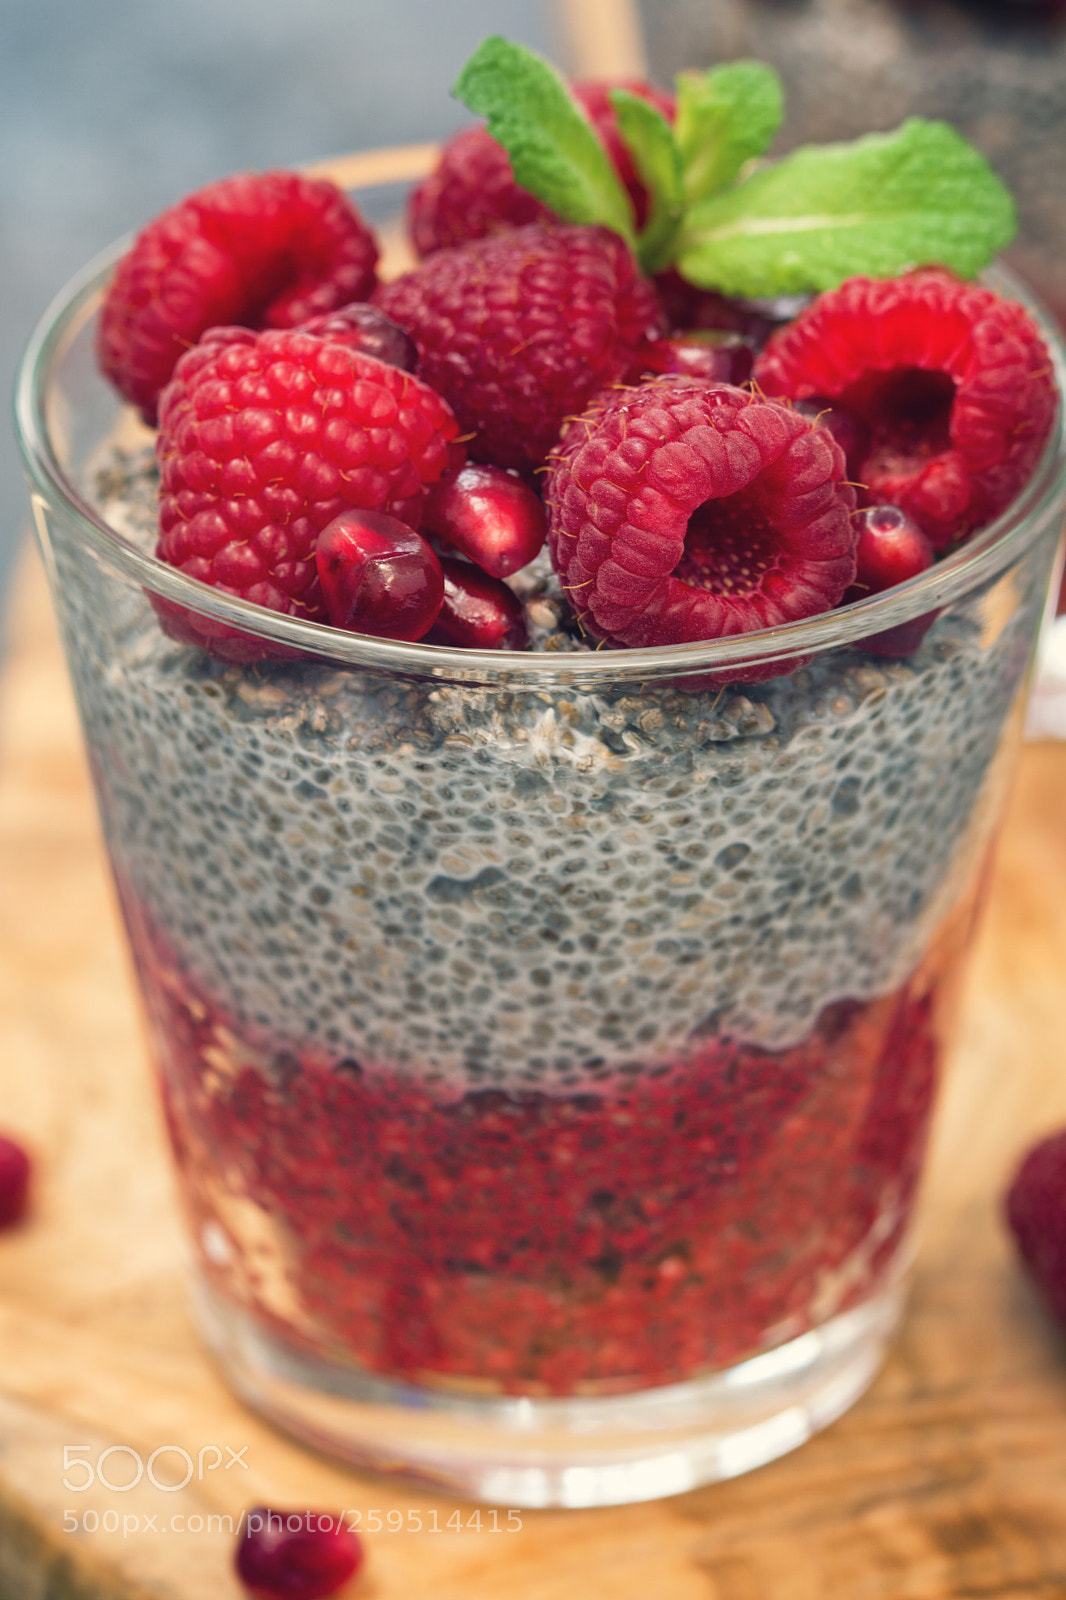 Sony a6300 sample photo. Chia seed pudding photography